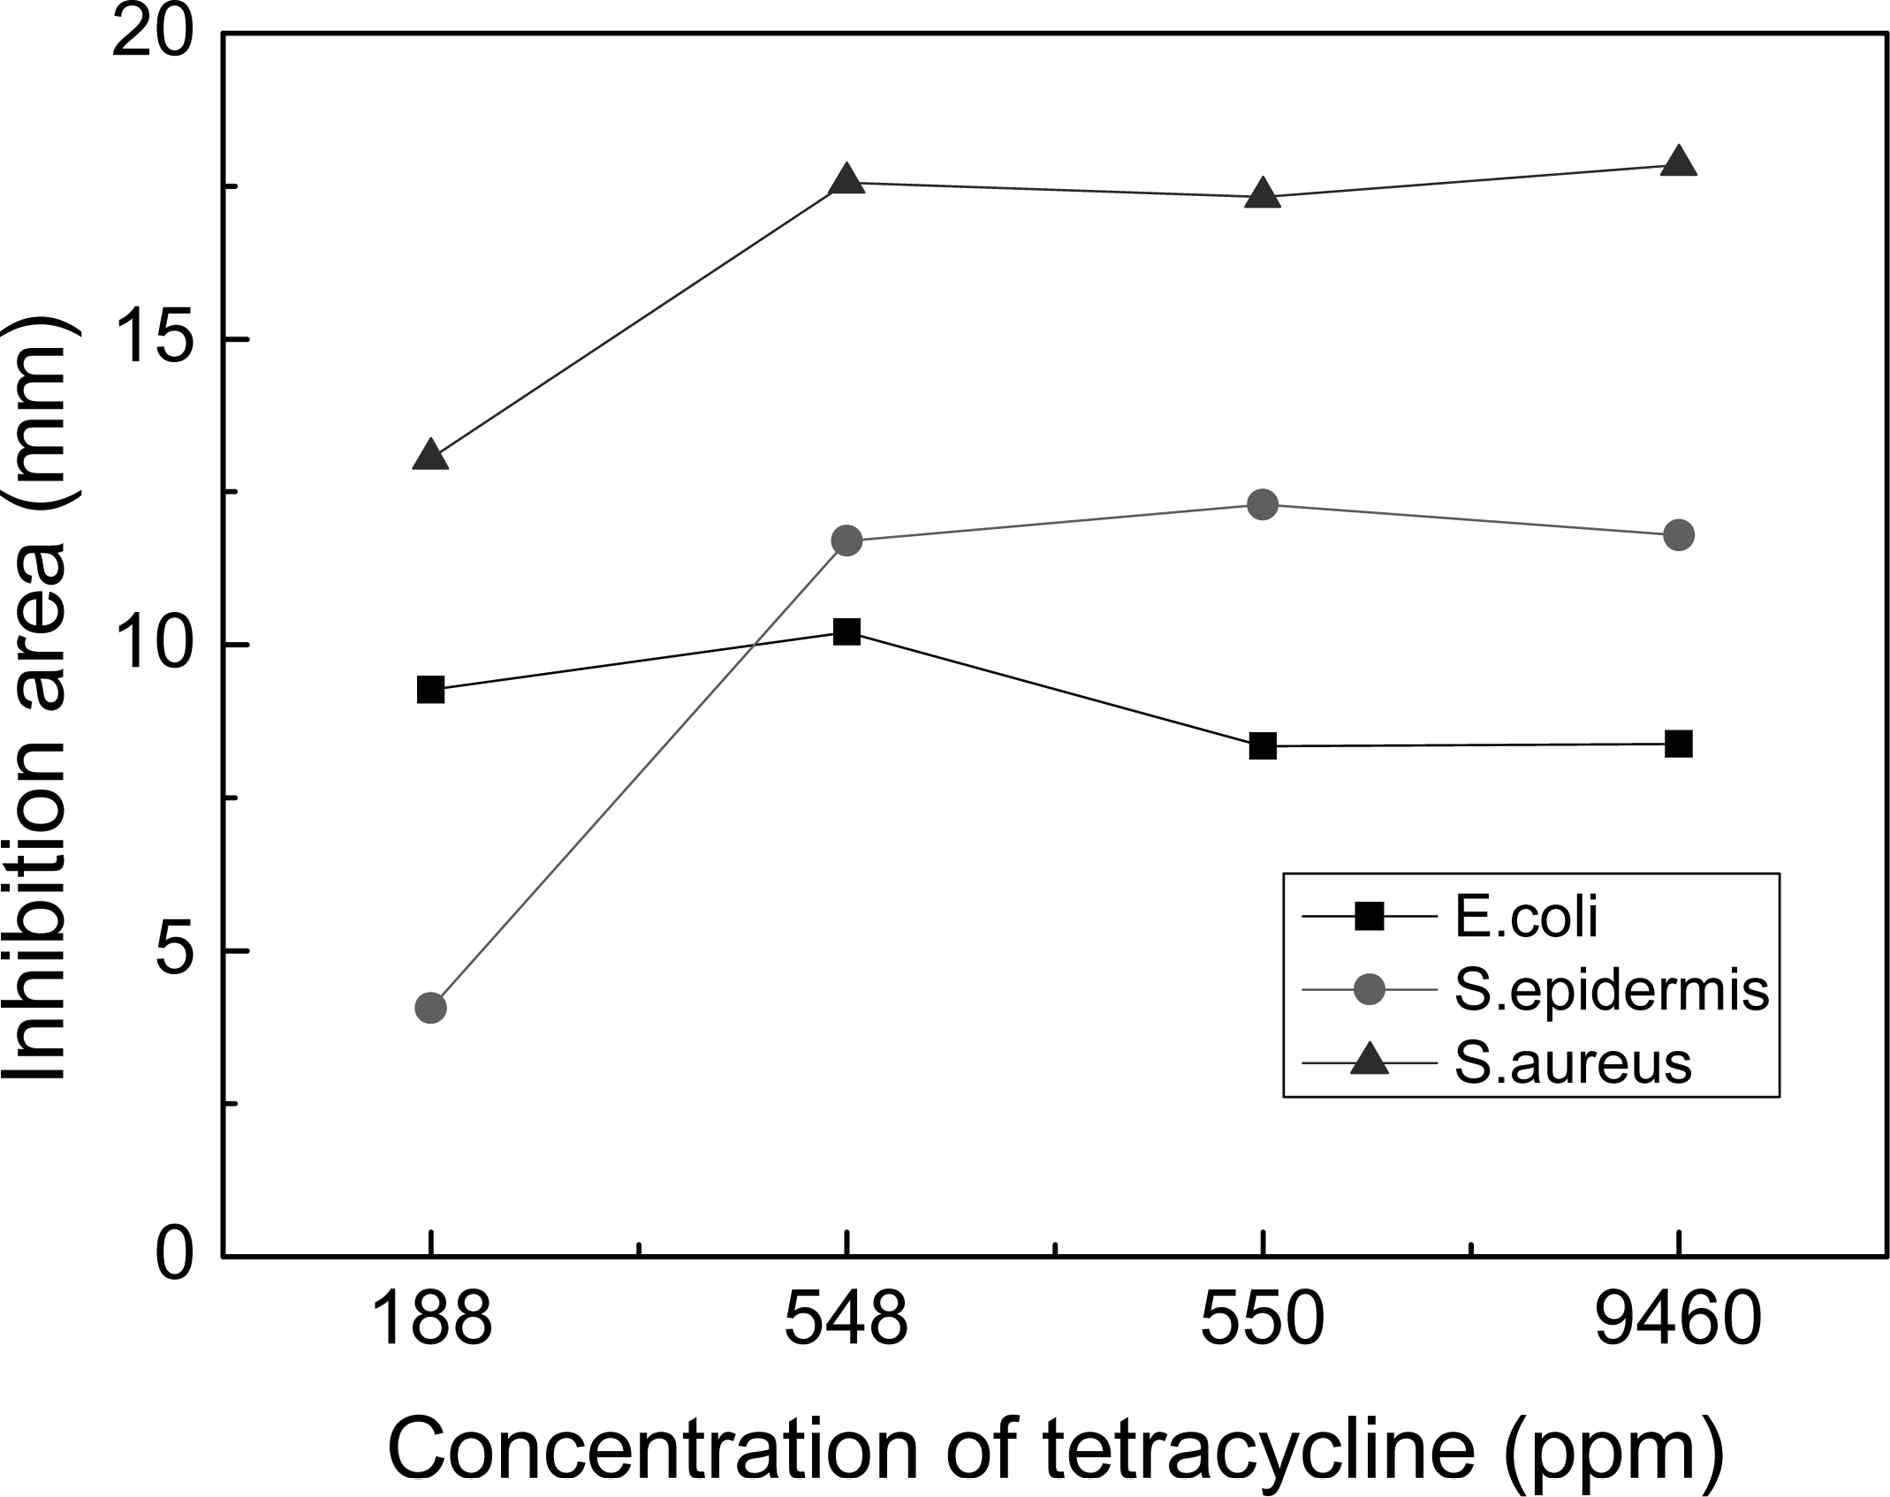 Effect of tetracycline on the growth of microorganisms after 24 hr.